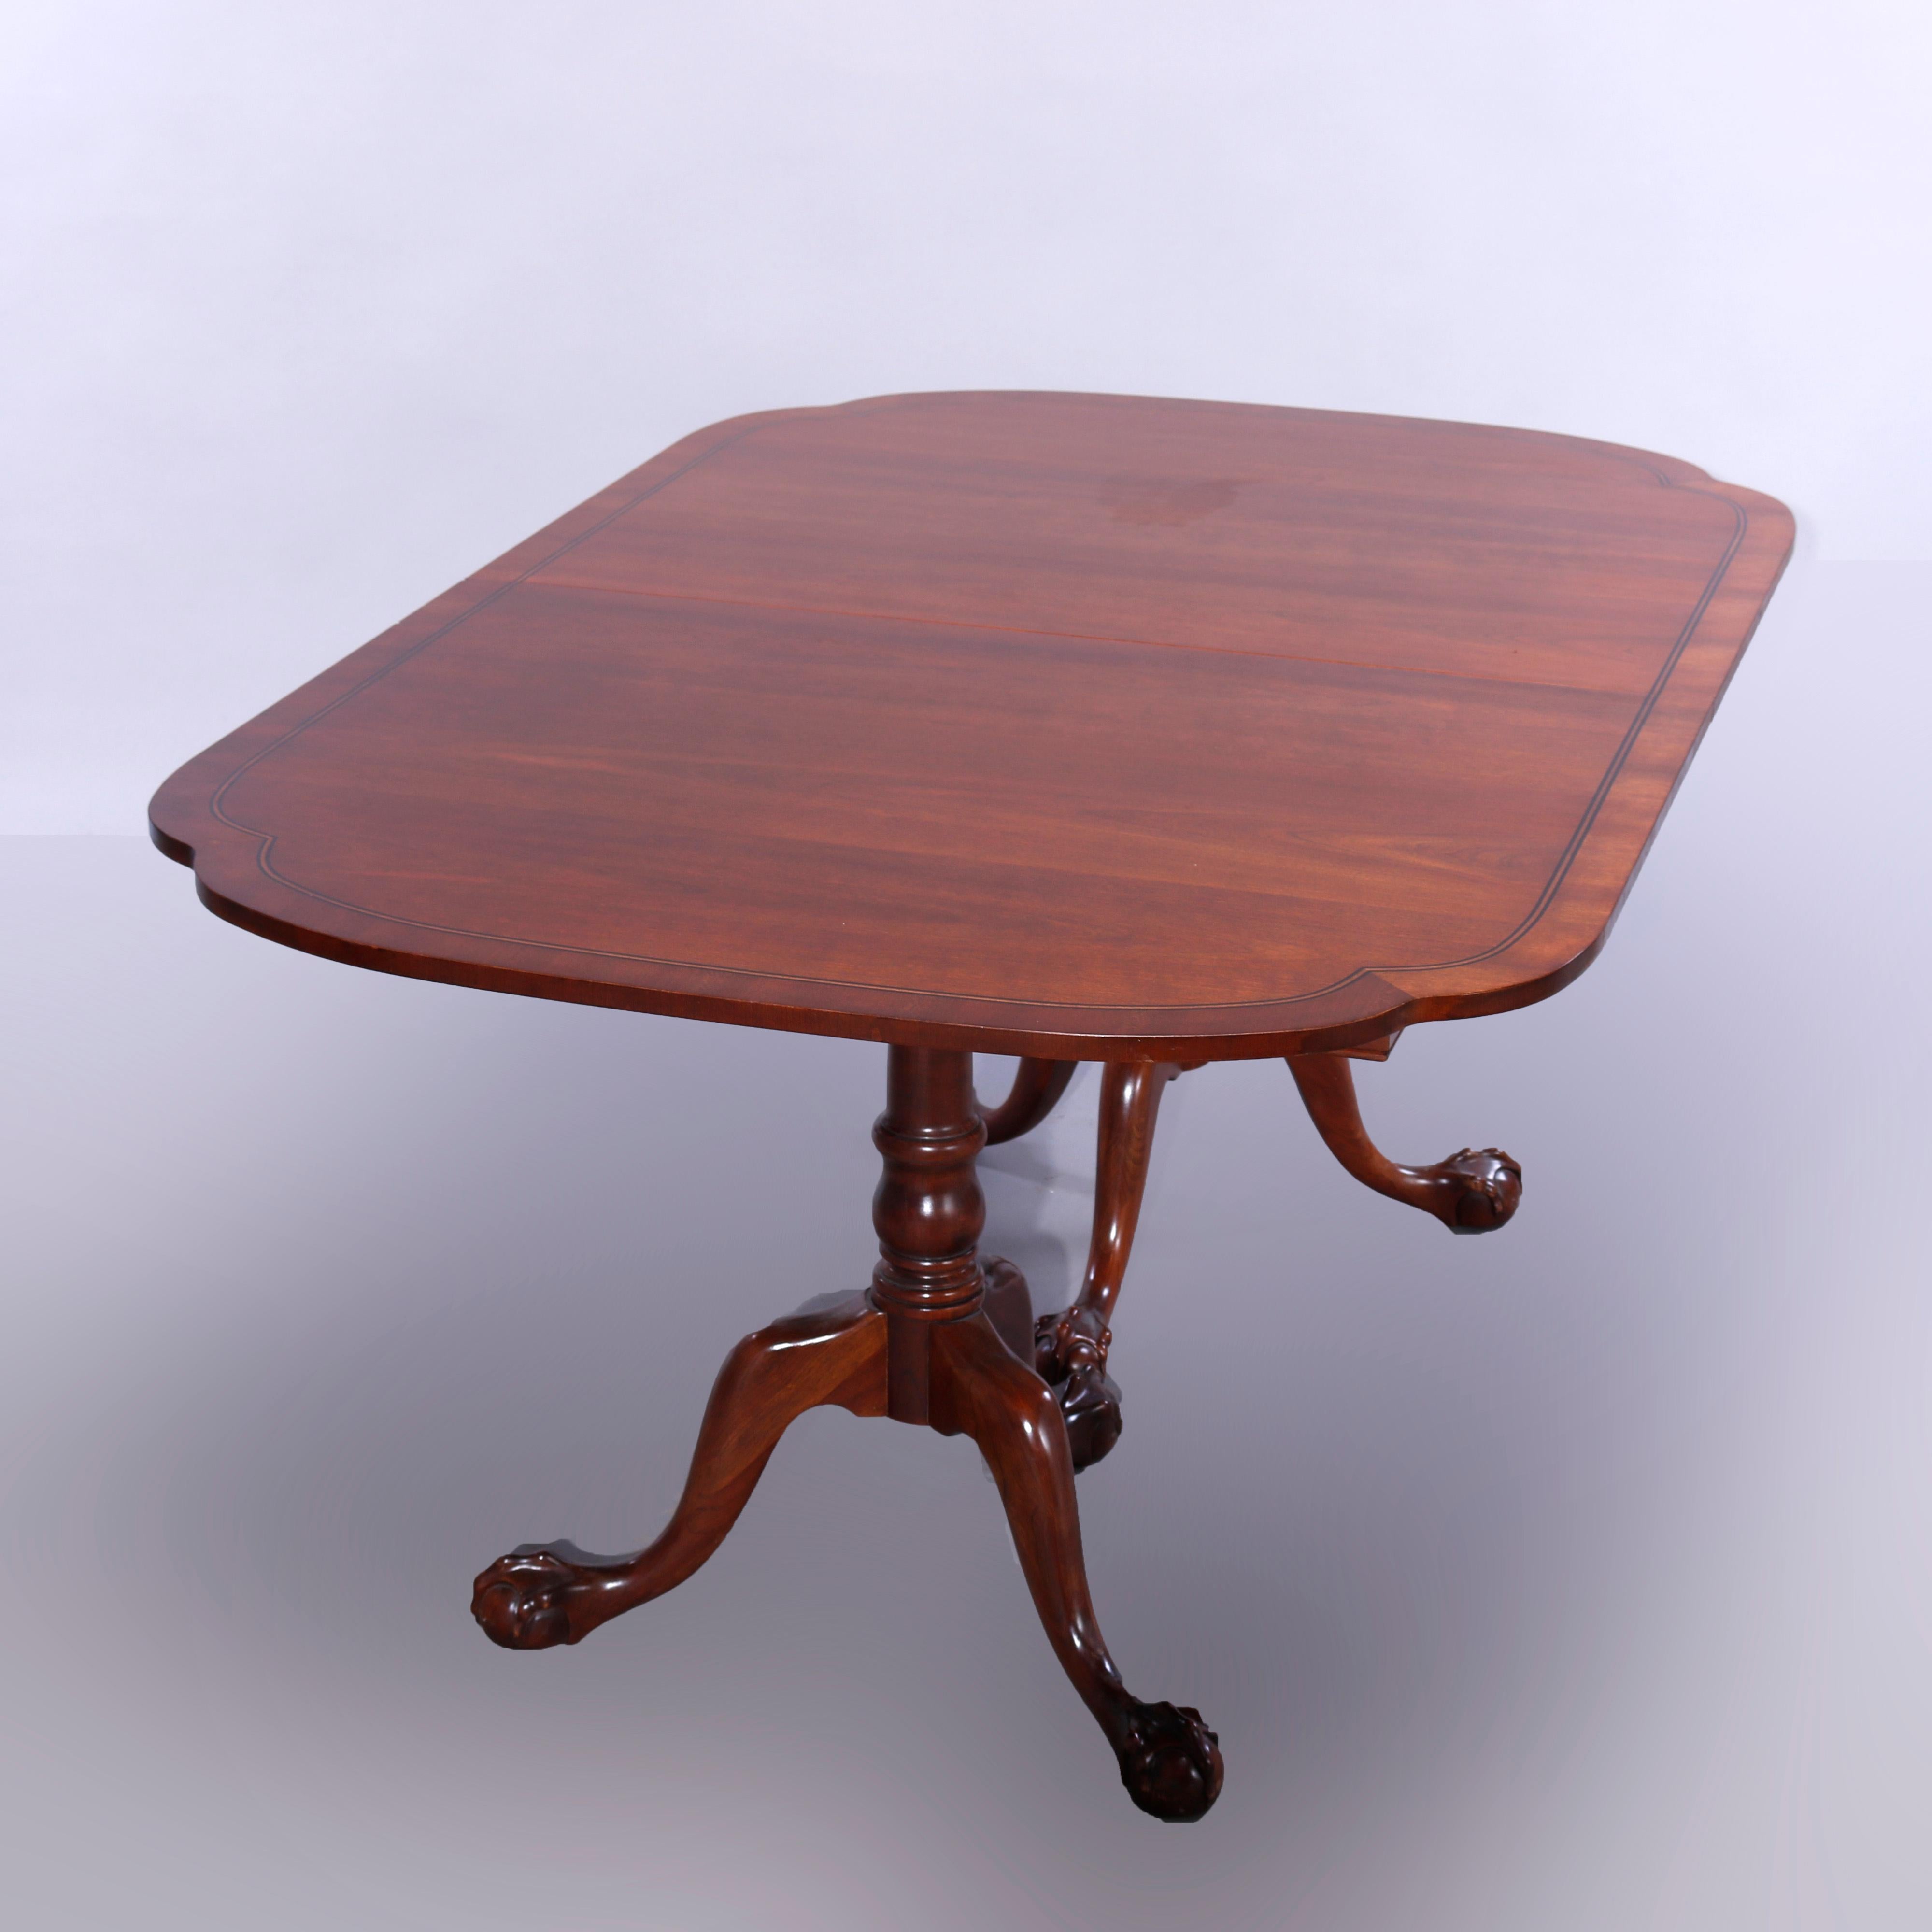 20th Century Antique Mahogany Chippendale Style Claw Foot Dining Table & Three Leaves c1930